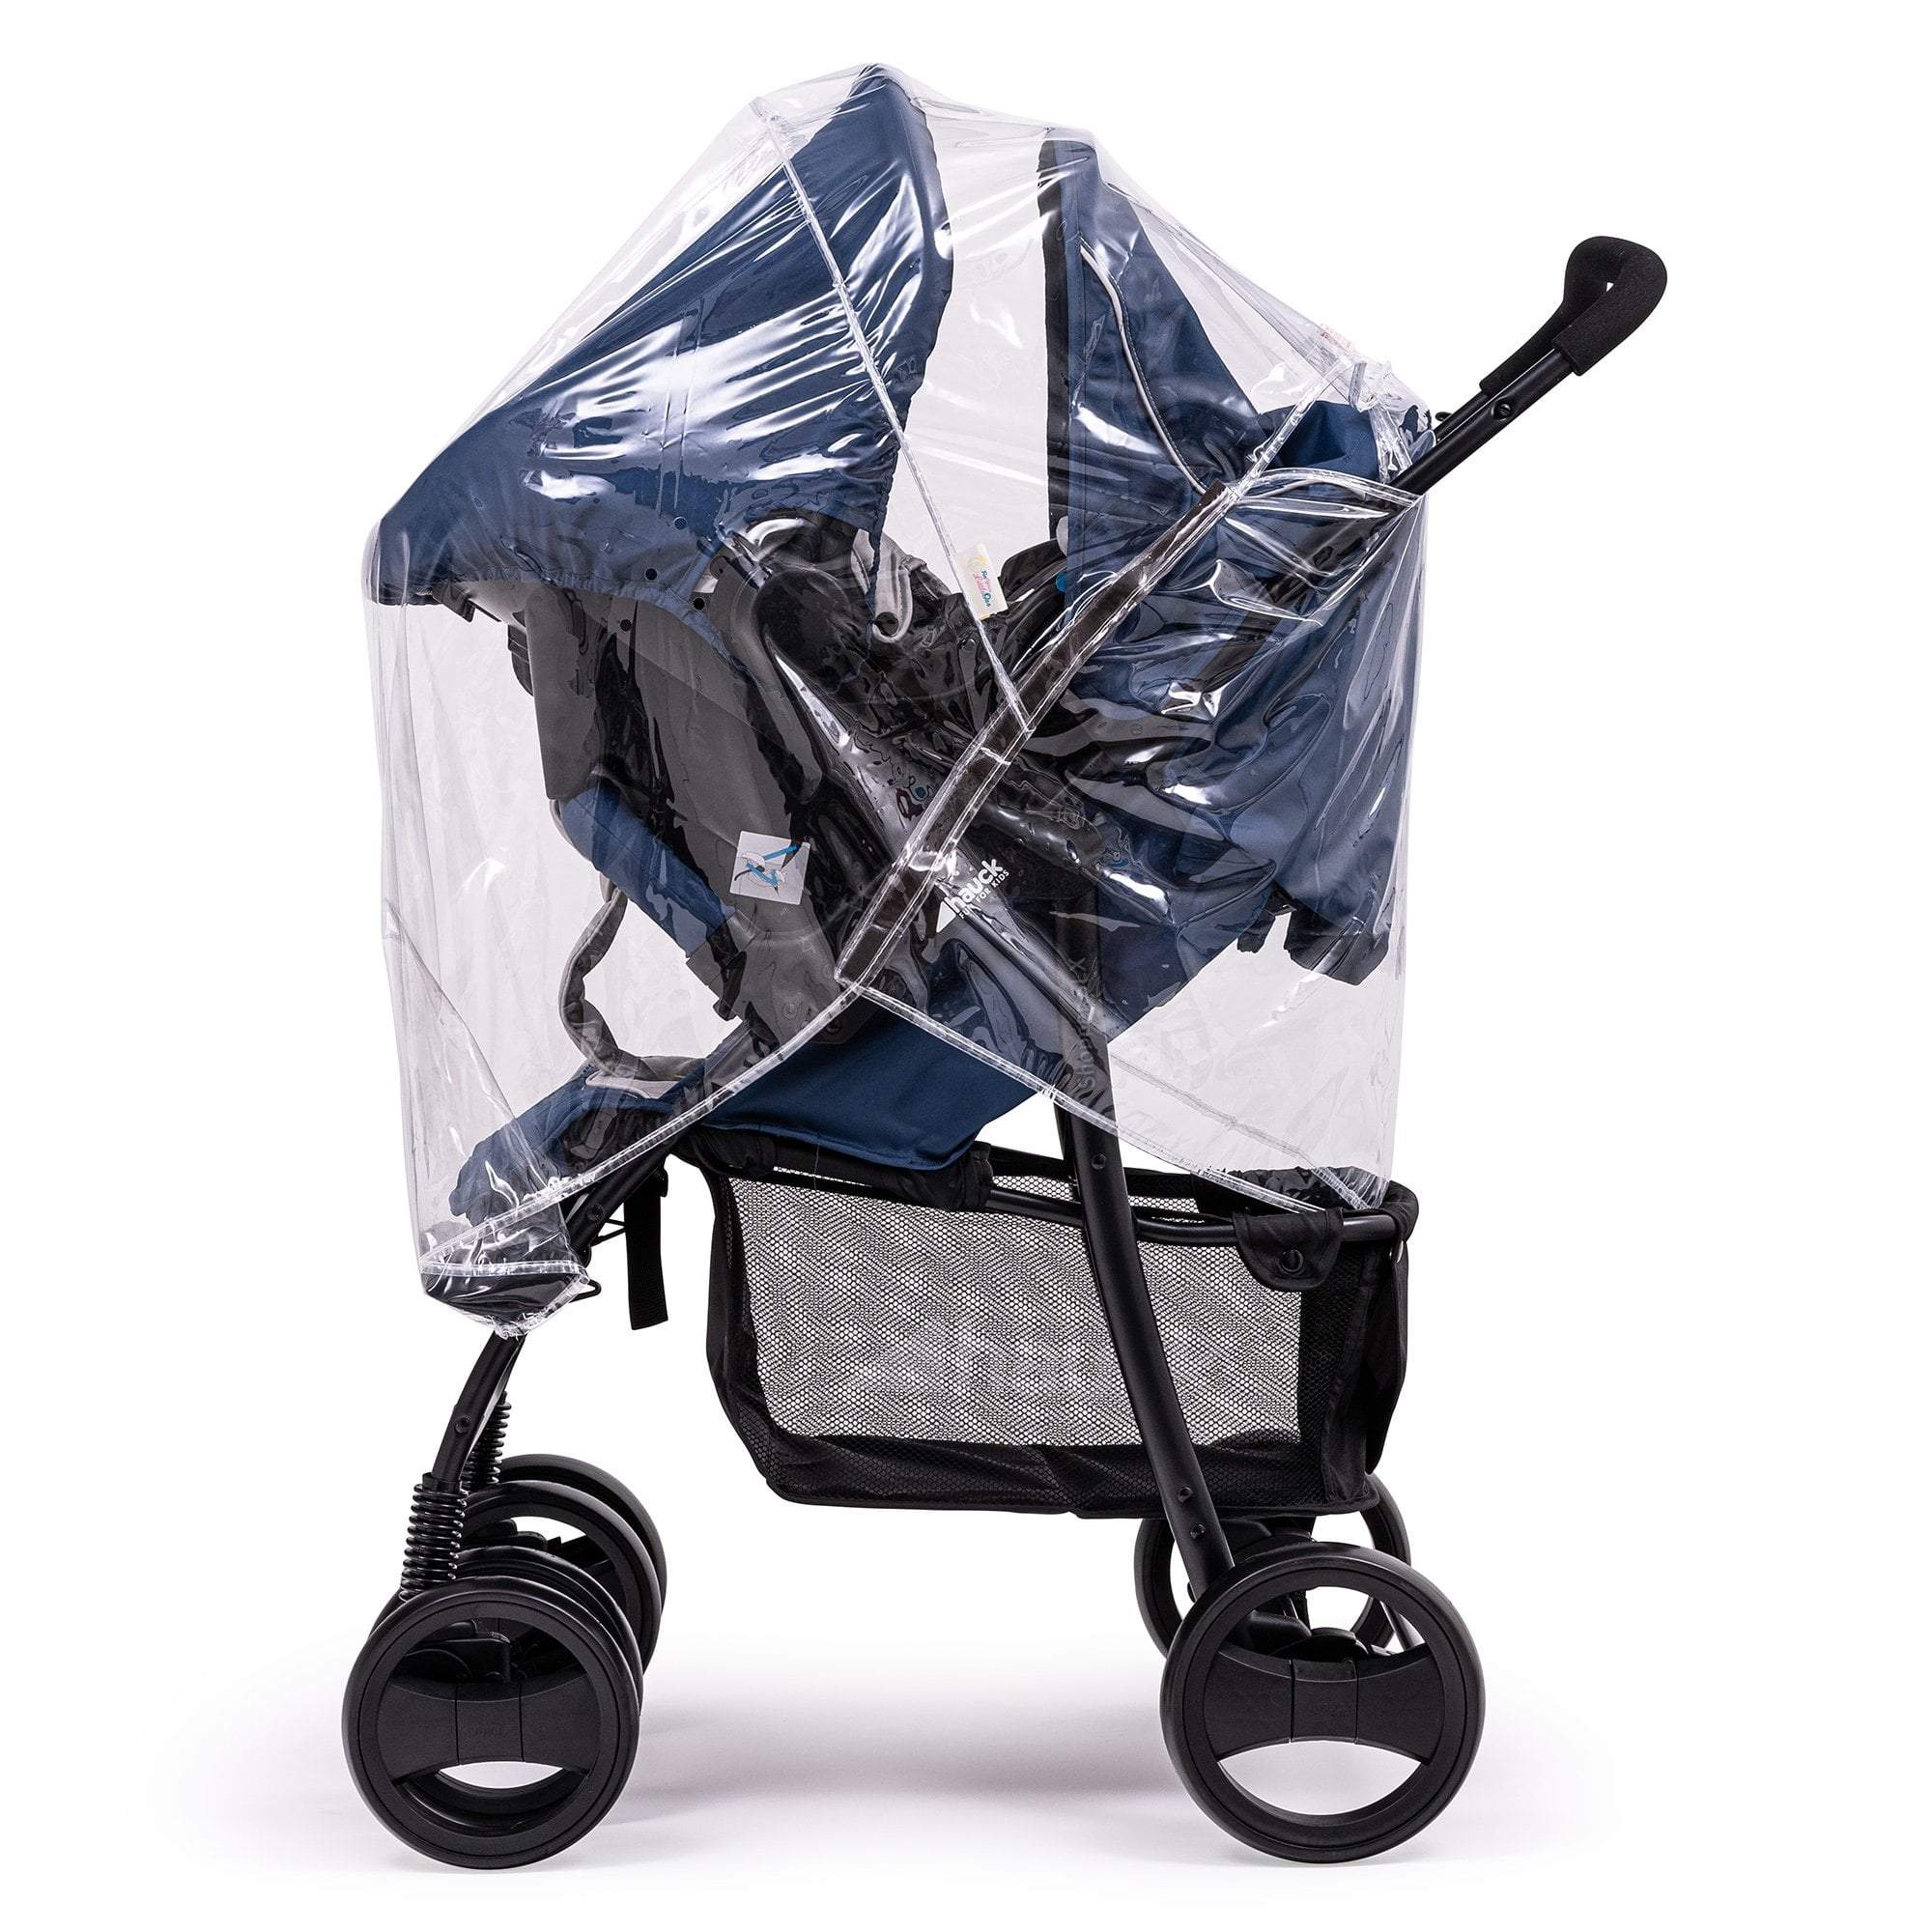 Travel System Raincover Compatible with Quax - Fits All Models - For Your Little One